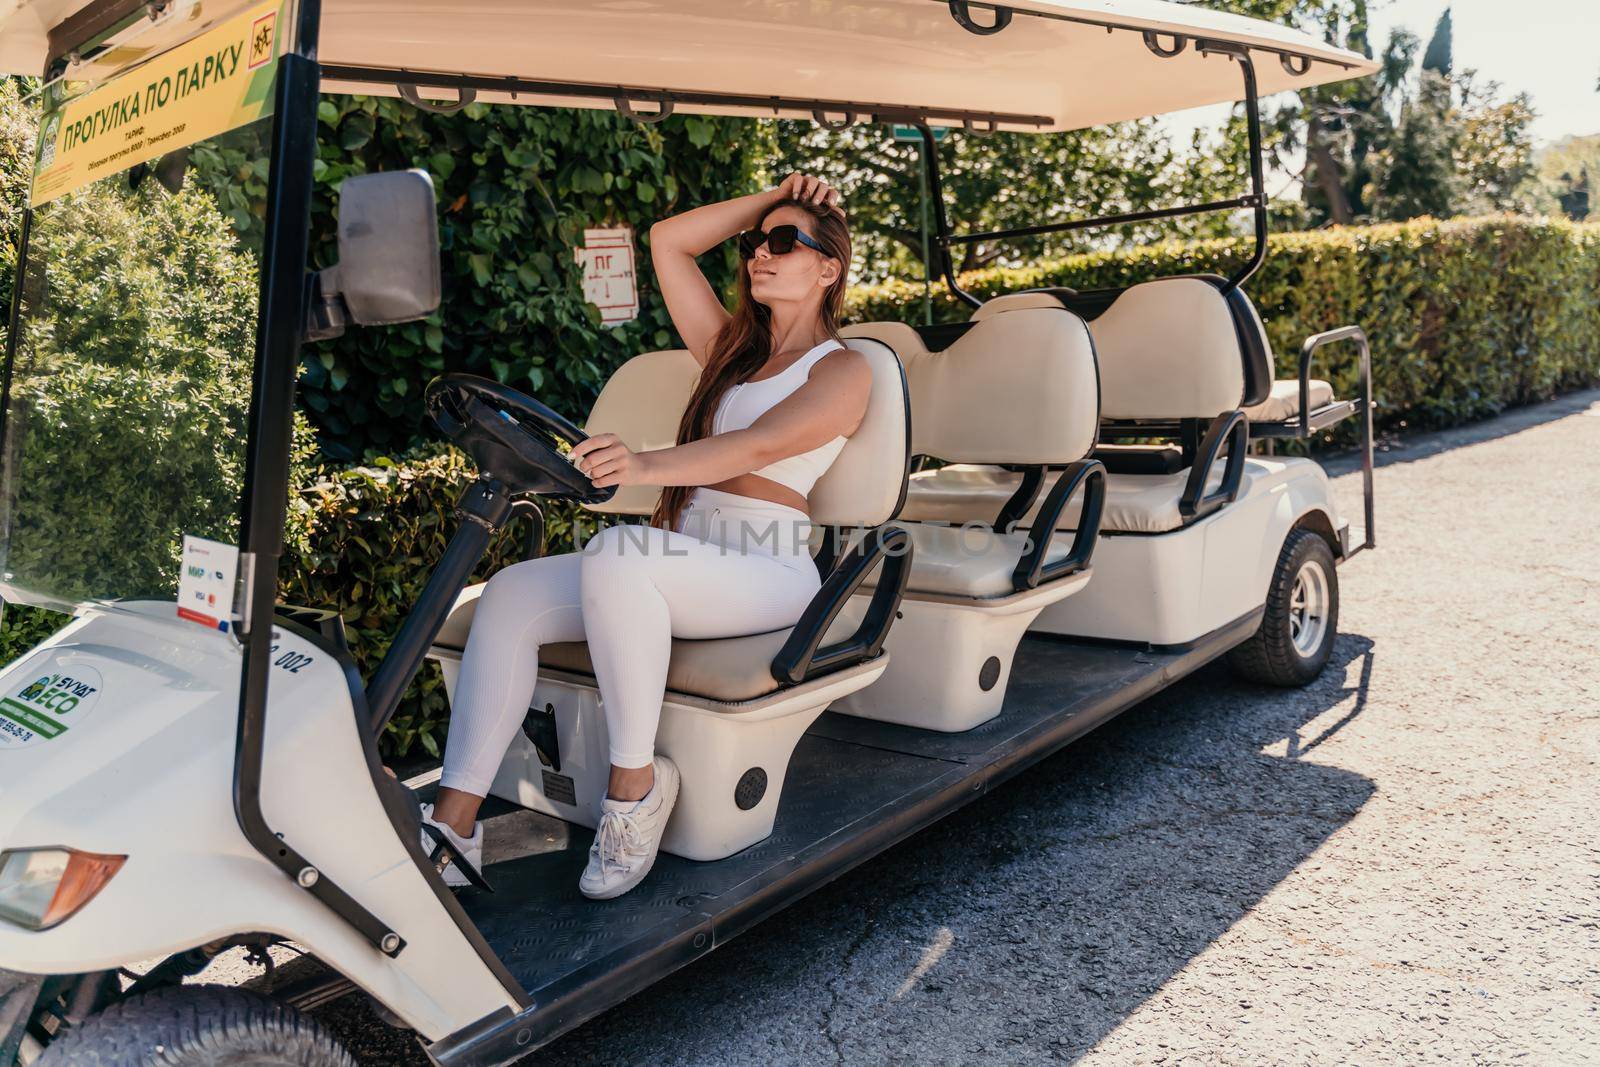 A middle-aged woman is driving a car for transporting tourists. Electric car, Tourist bus. Car for transporting people around the hotel, park, golf club.